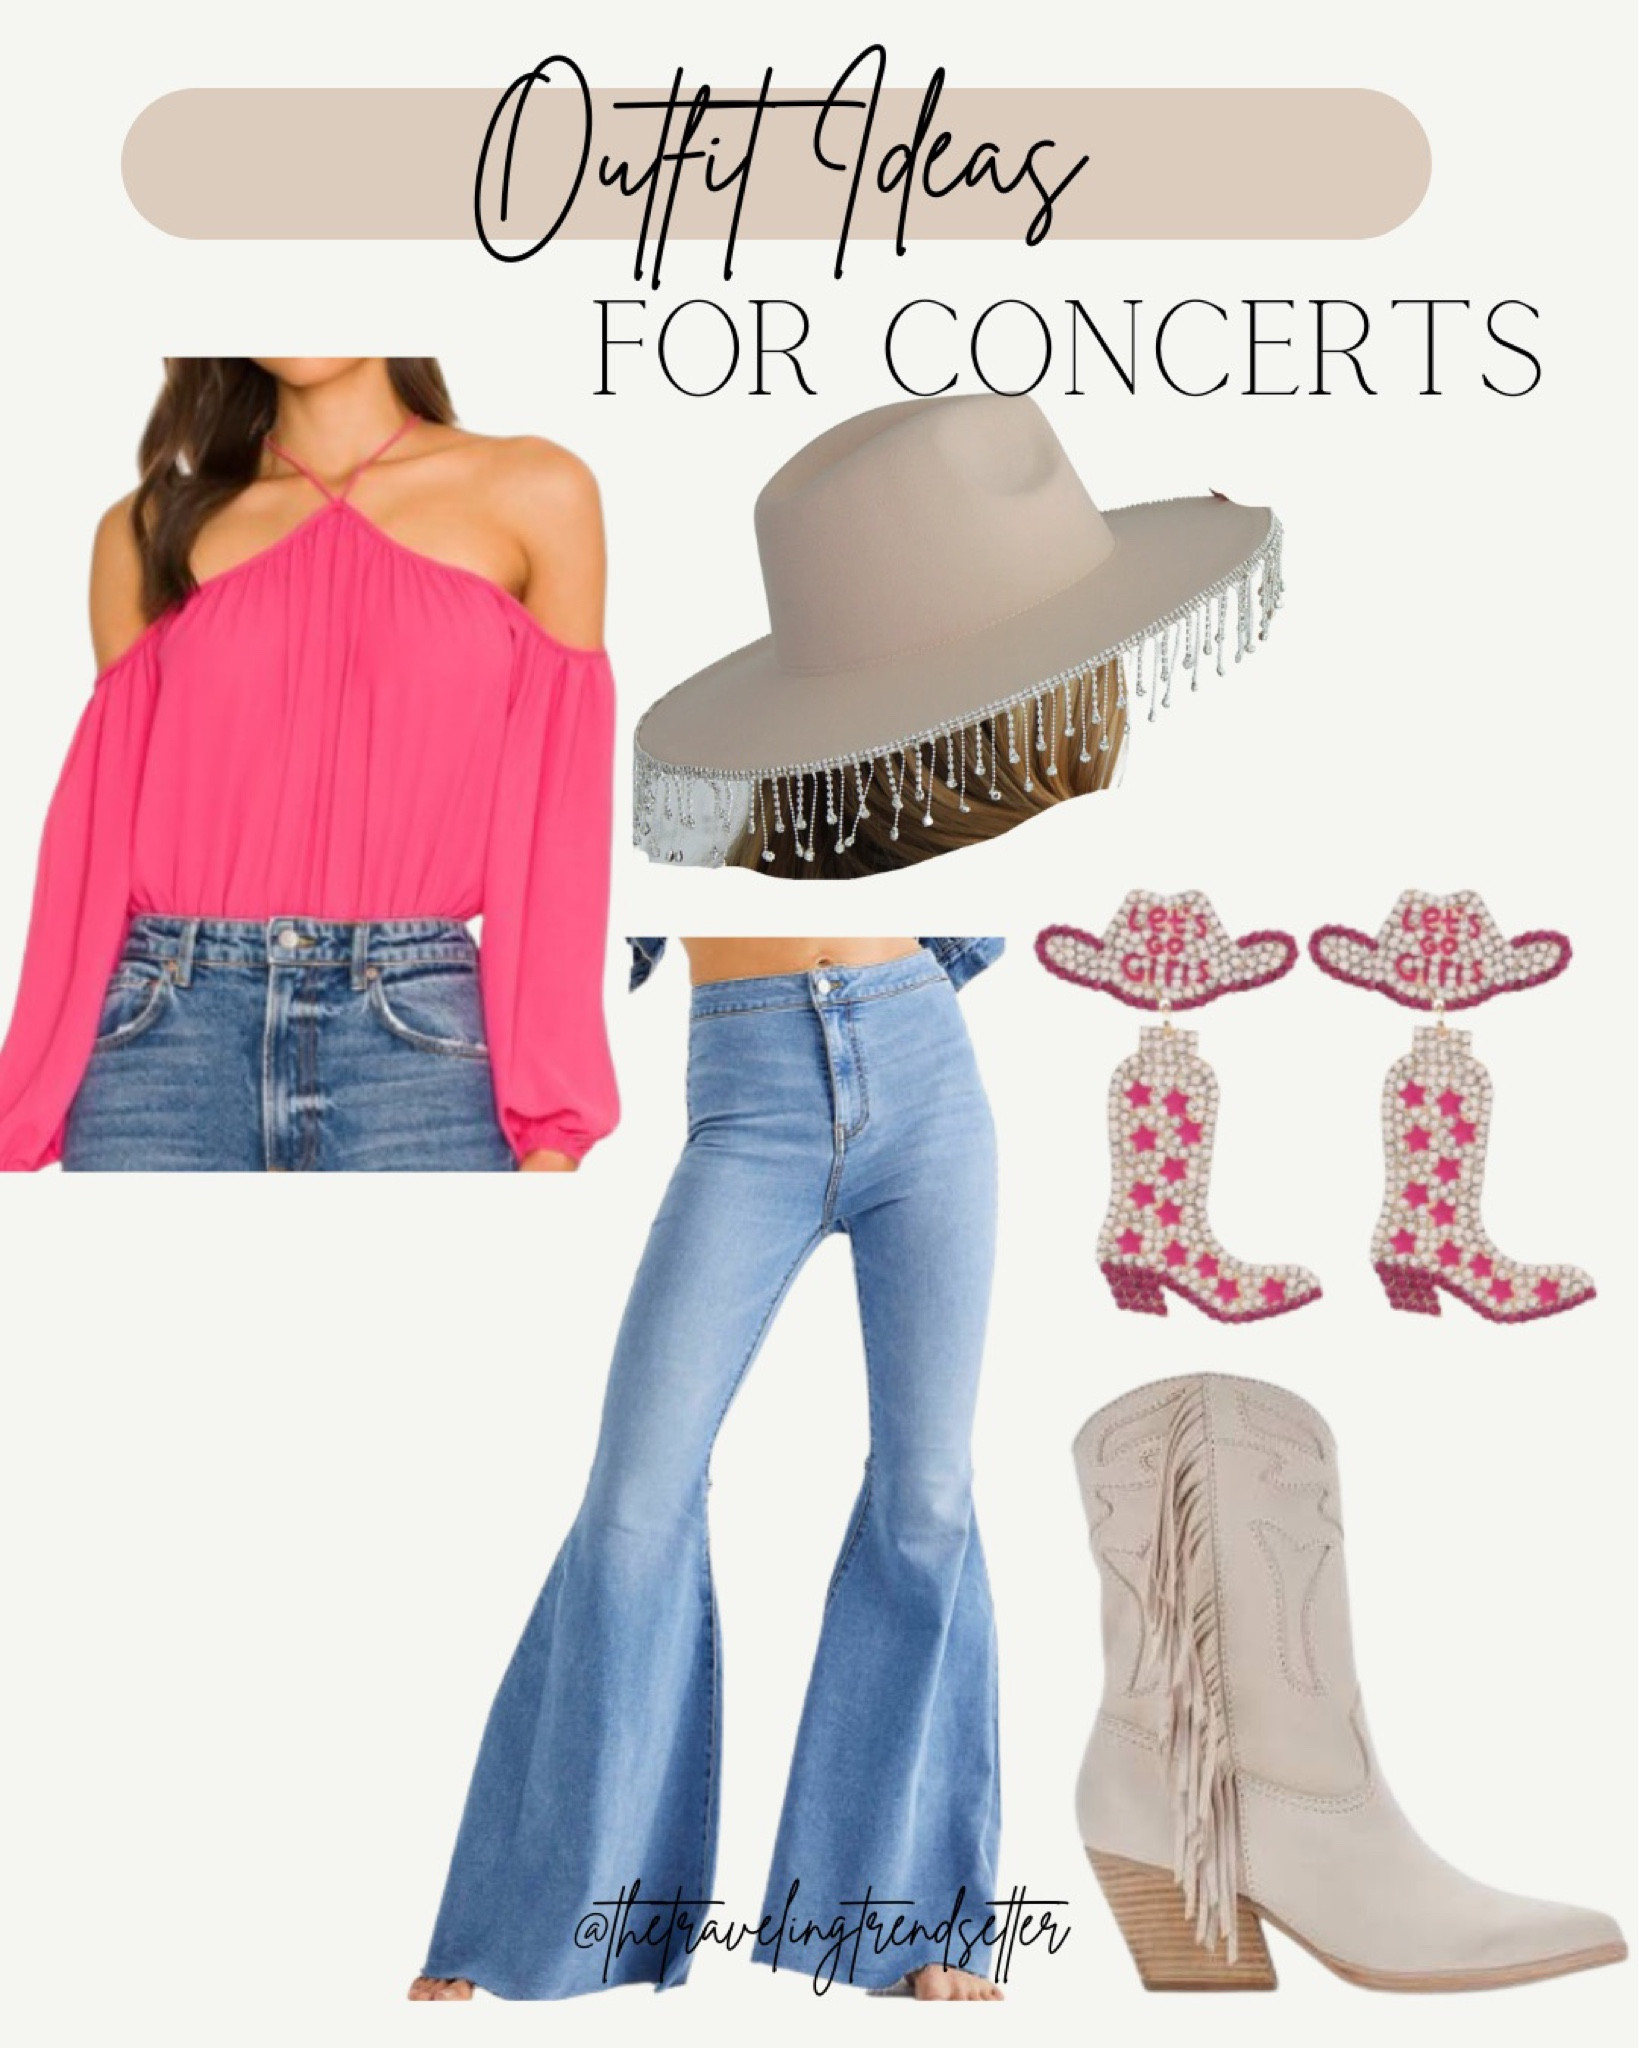 Sydne Style shows western outfit ideas in cowboy boots and jeans